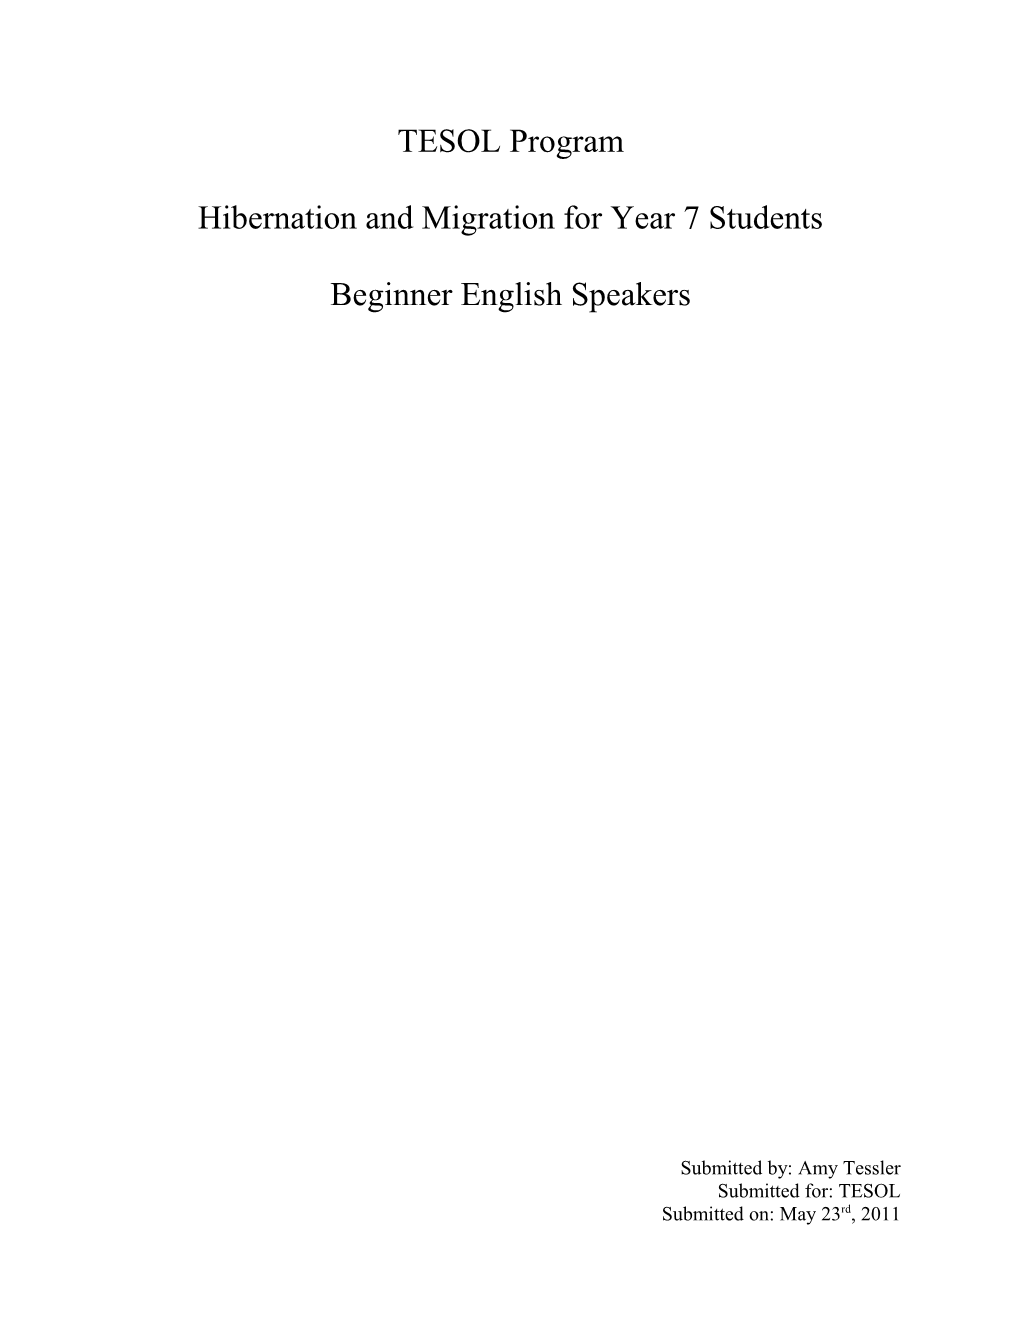 Hibernation and Migration for Year 7 Students